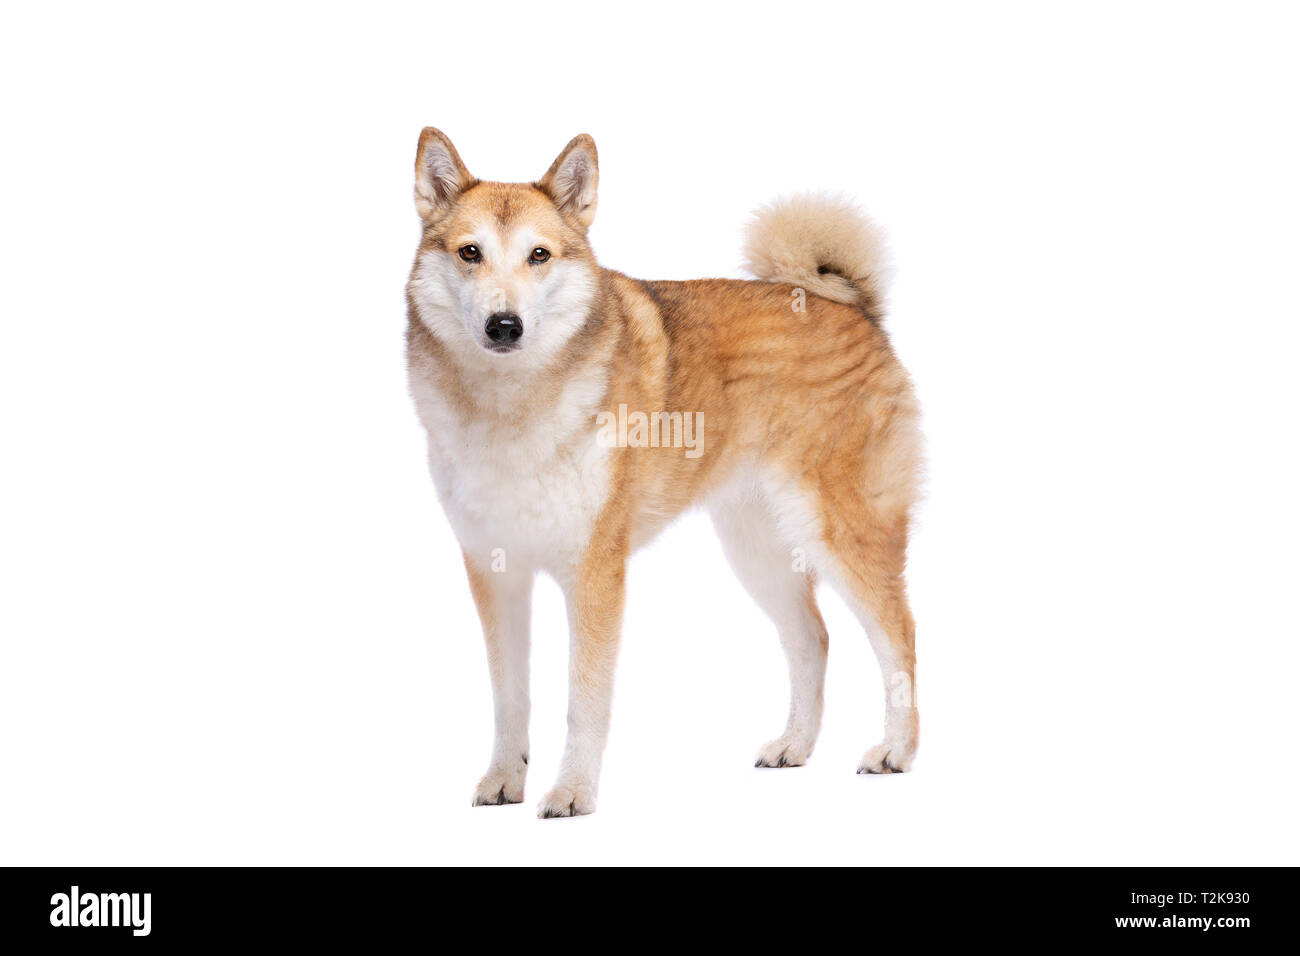 West Siberian Laika dog in front of a white background Stock Photo